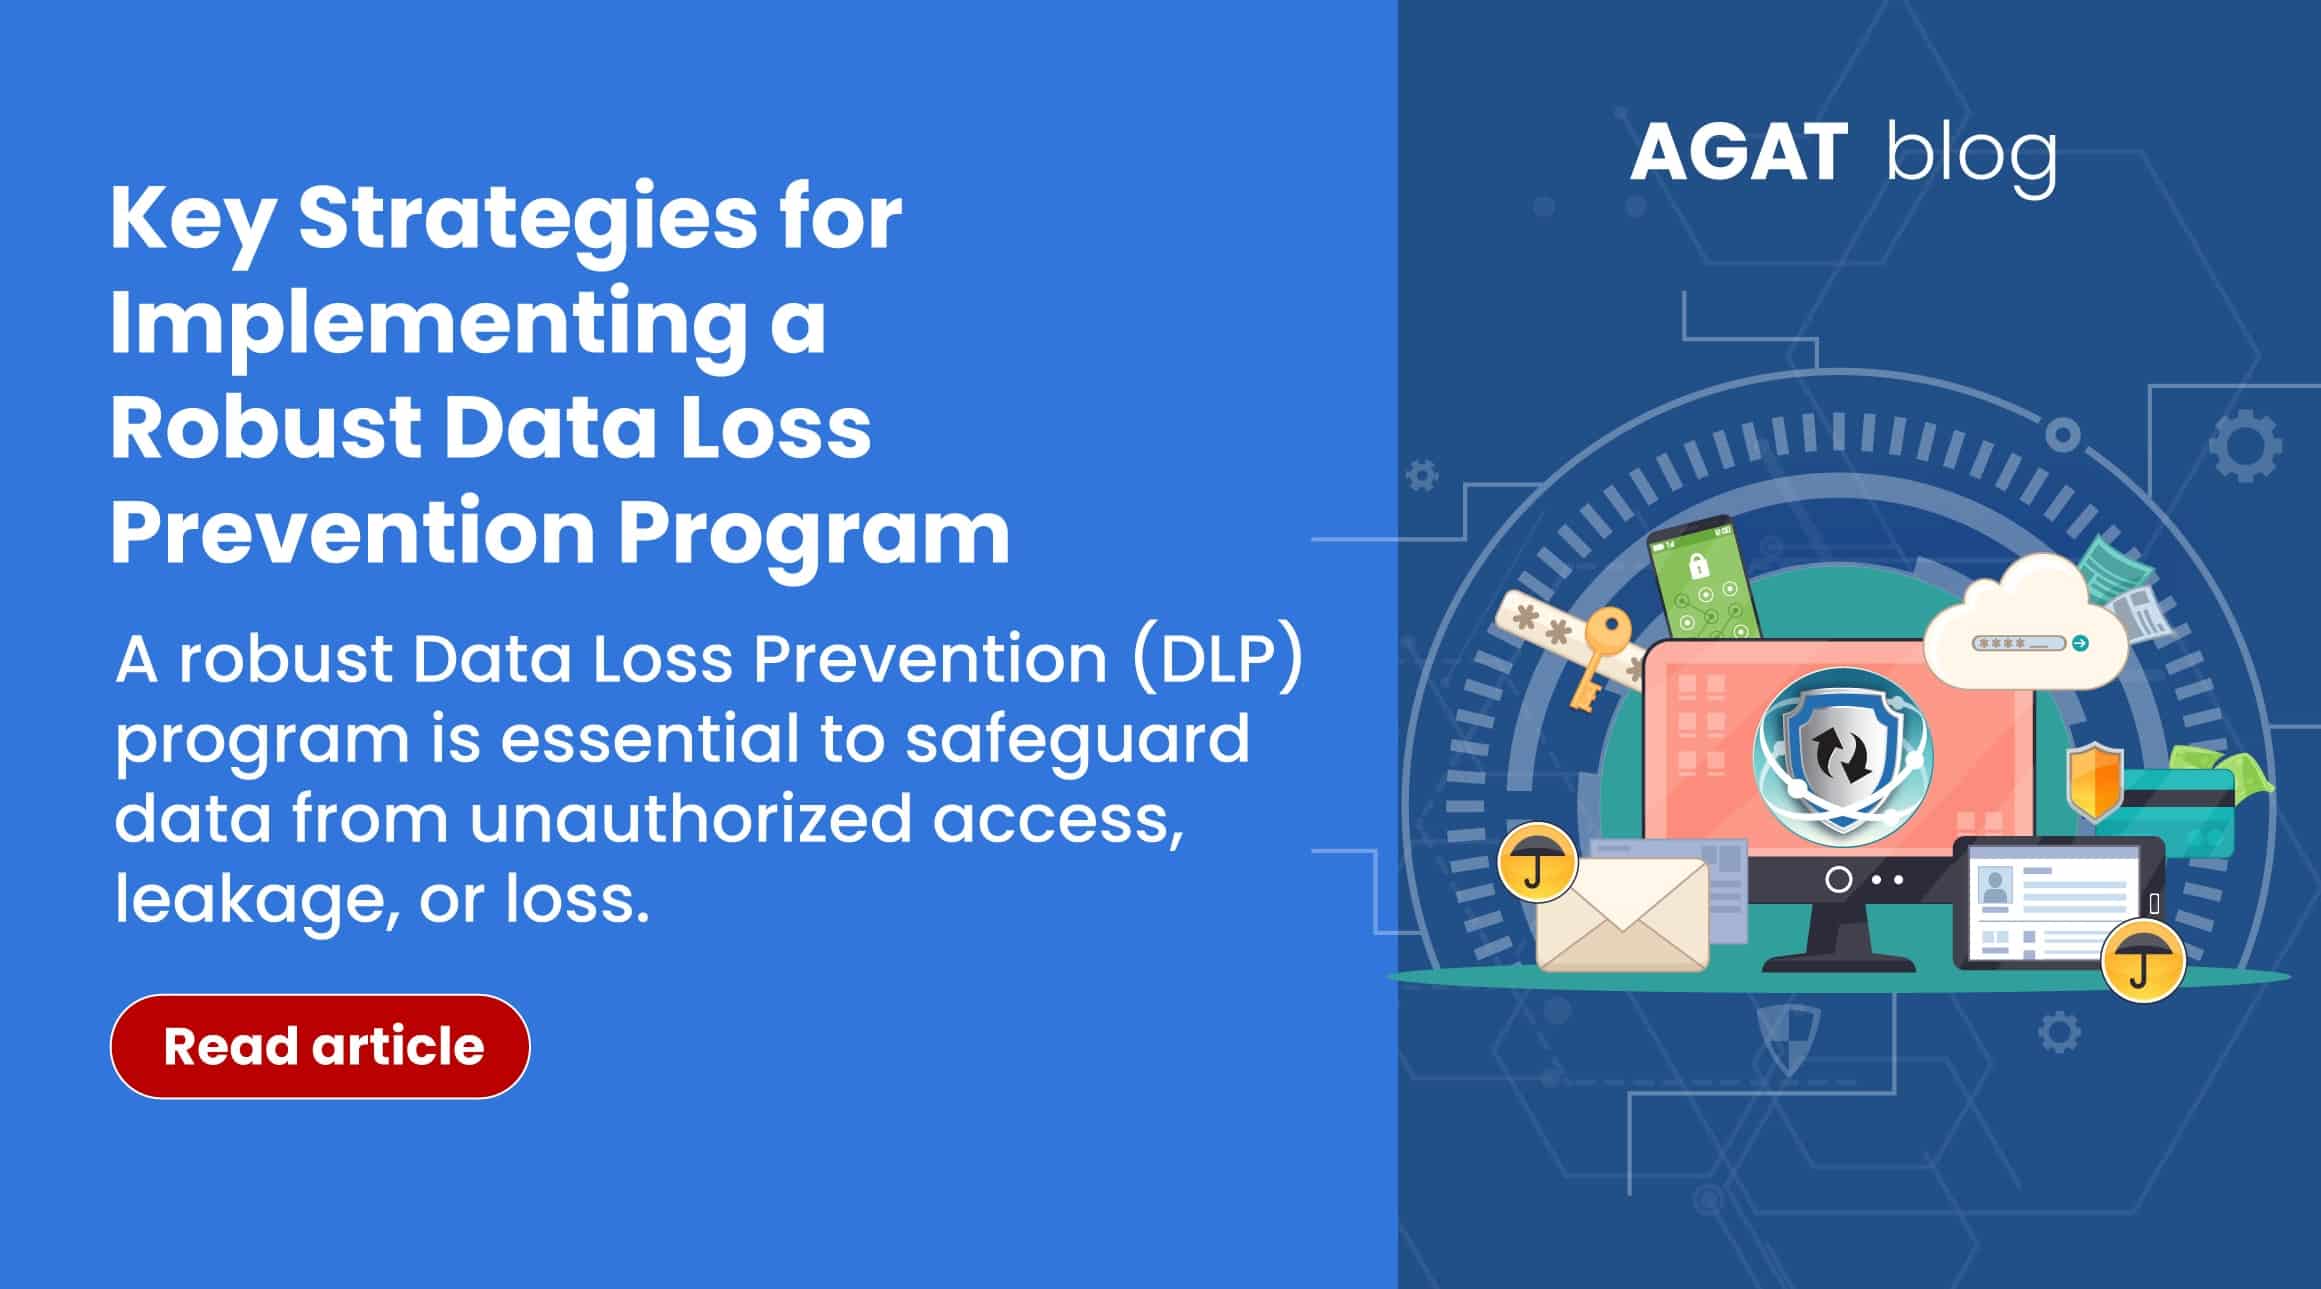 Key Strategies for Implementing a Robust Data Loss Prevention Program